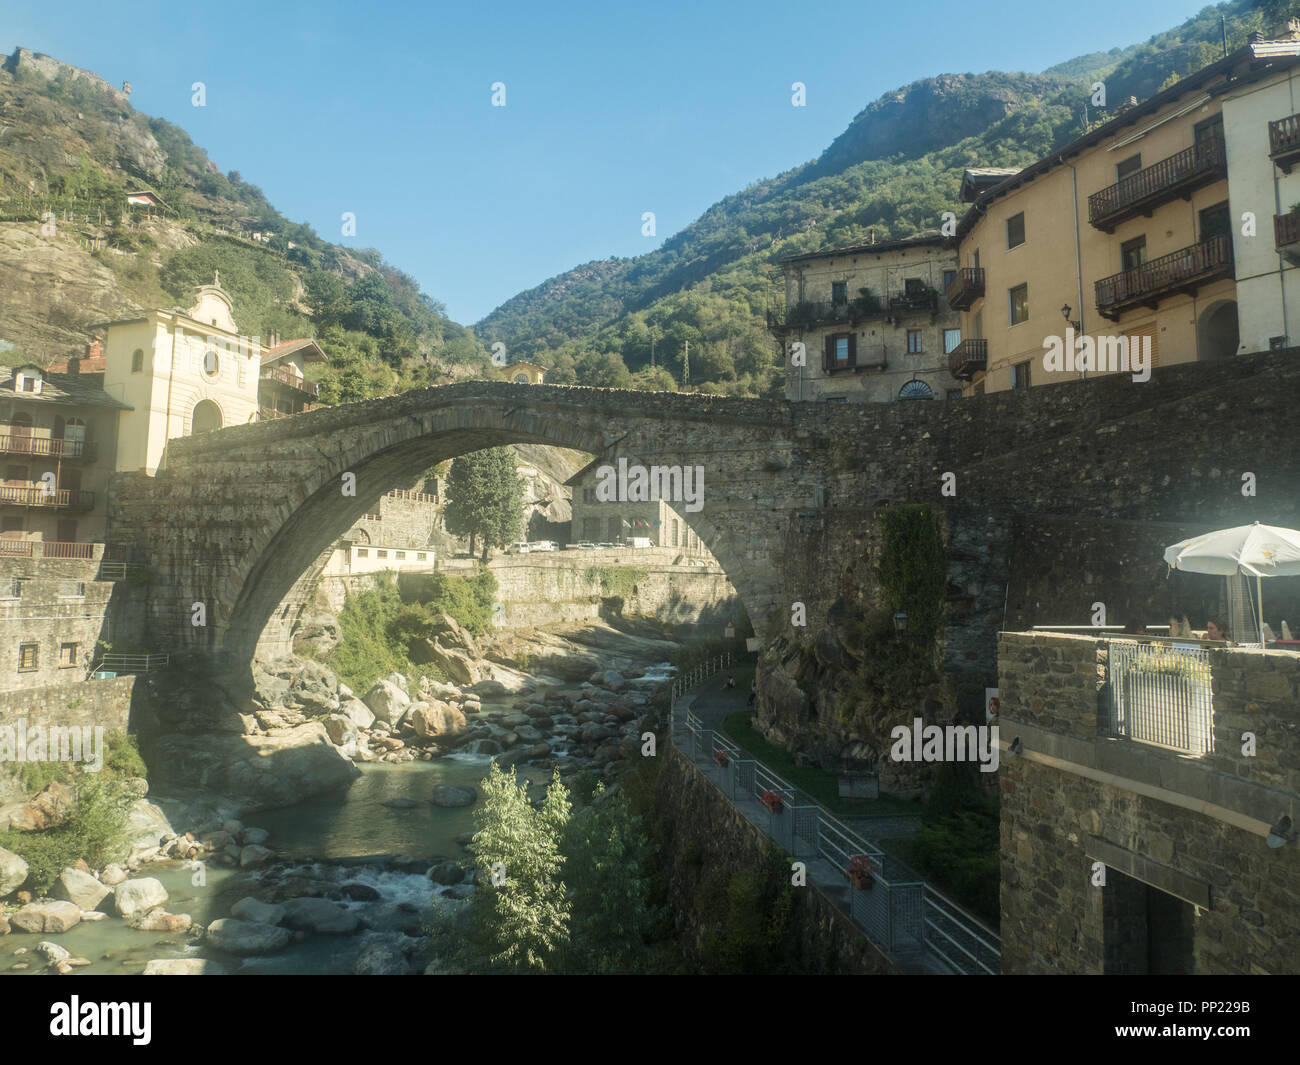 Roman bridge dated to the 1st century BC over the river Lys in the town of Pont Saint Martin, Aosta Valley NW Italy. Stock Photo